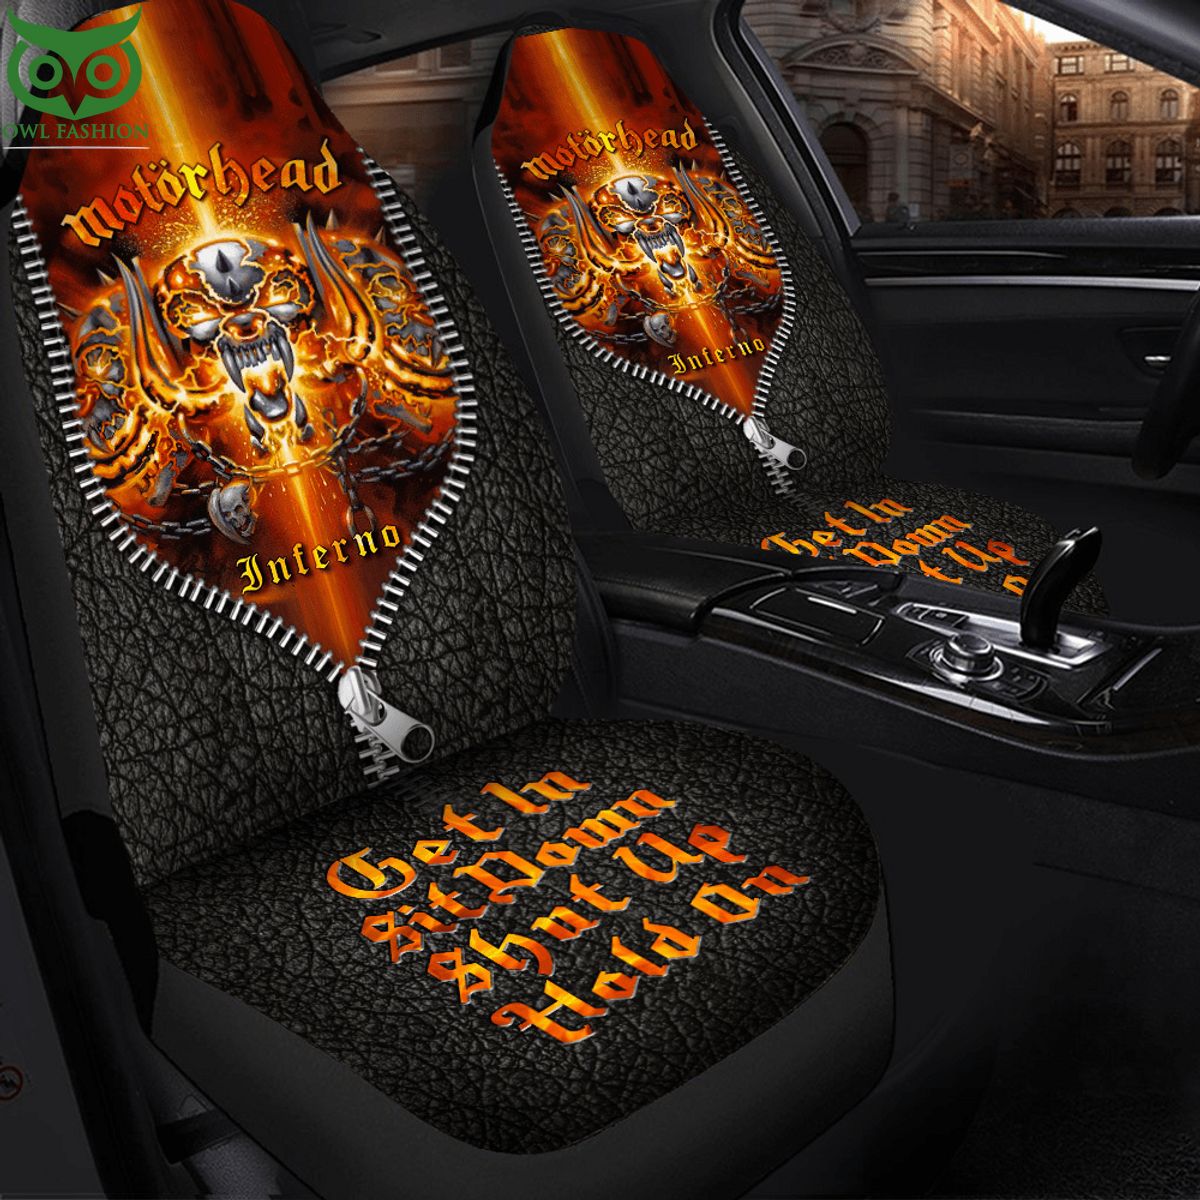 Motorhead Inferno Skull Car Seat Cover You tried editing this time?